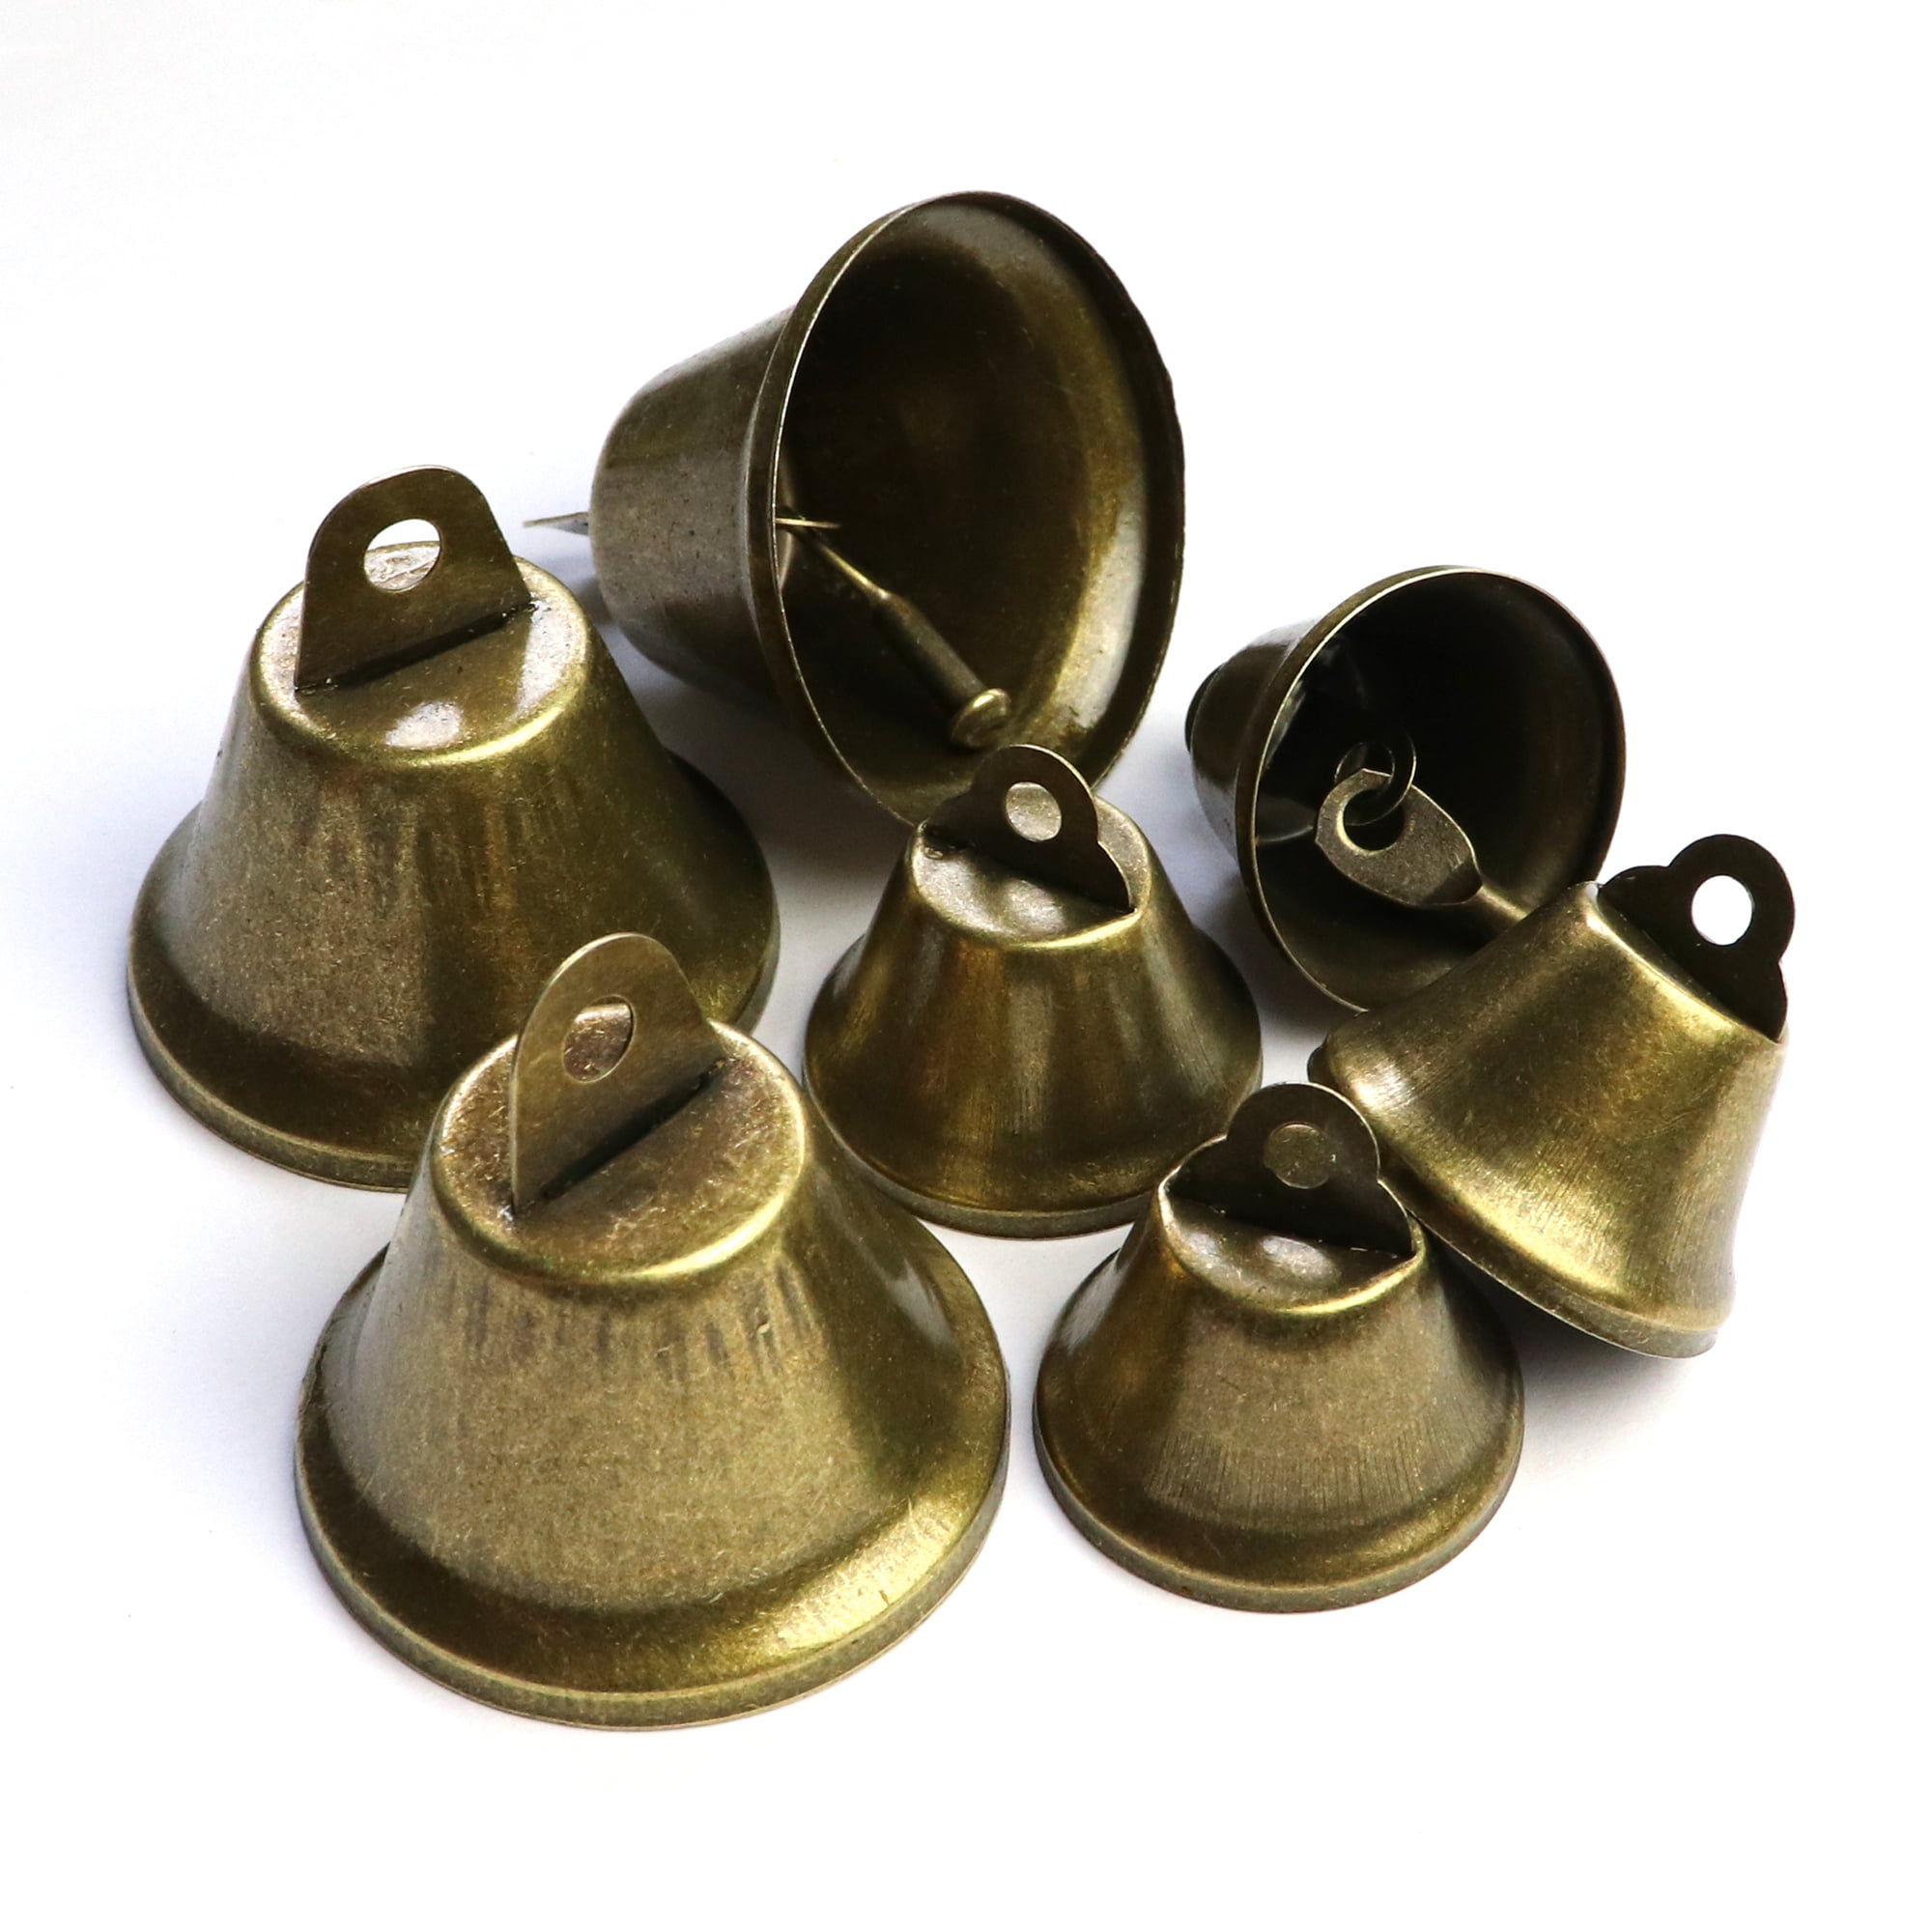 image 0 of Vintage Bronze Jingle Bells Craft Bells 1.5 Inch and 1 Inch for Dog Potty Training, Housebreaking, Wind Chimes, Christmas Bell (25 Pieces)